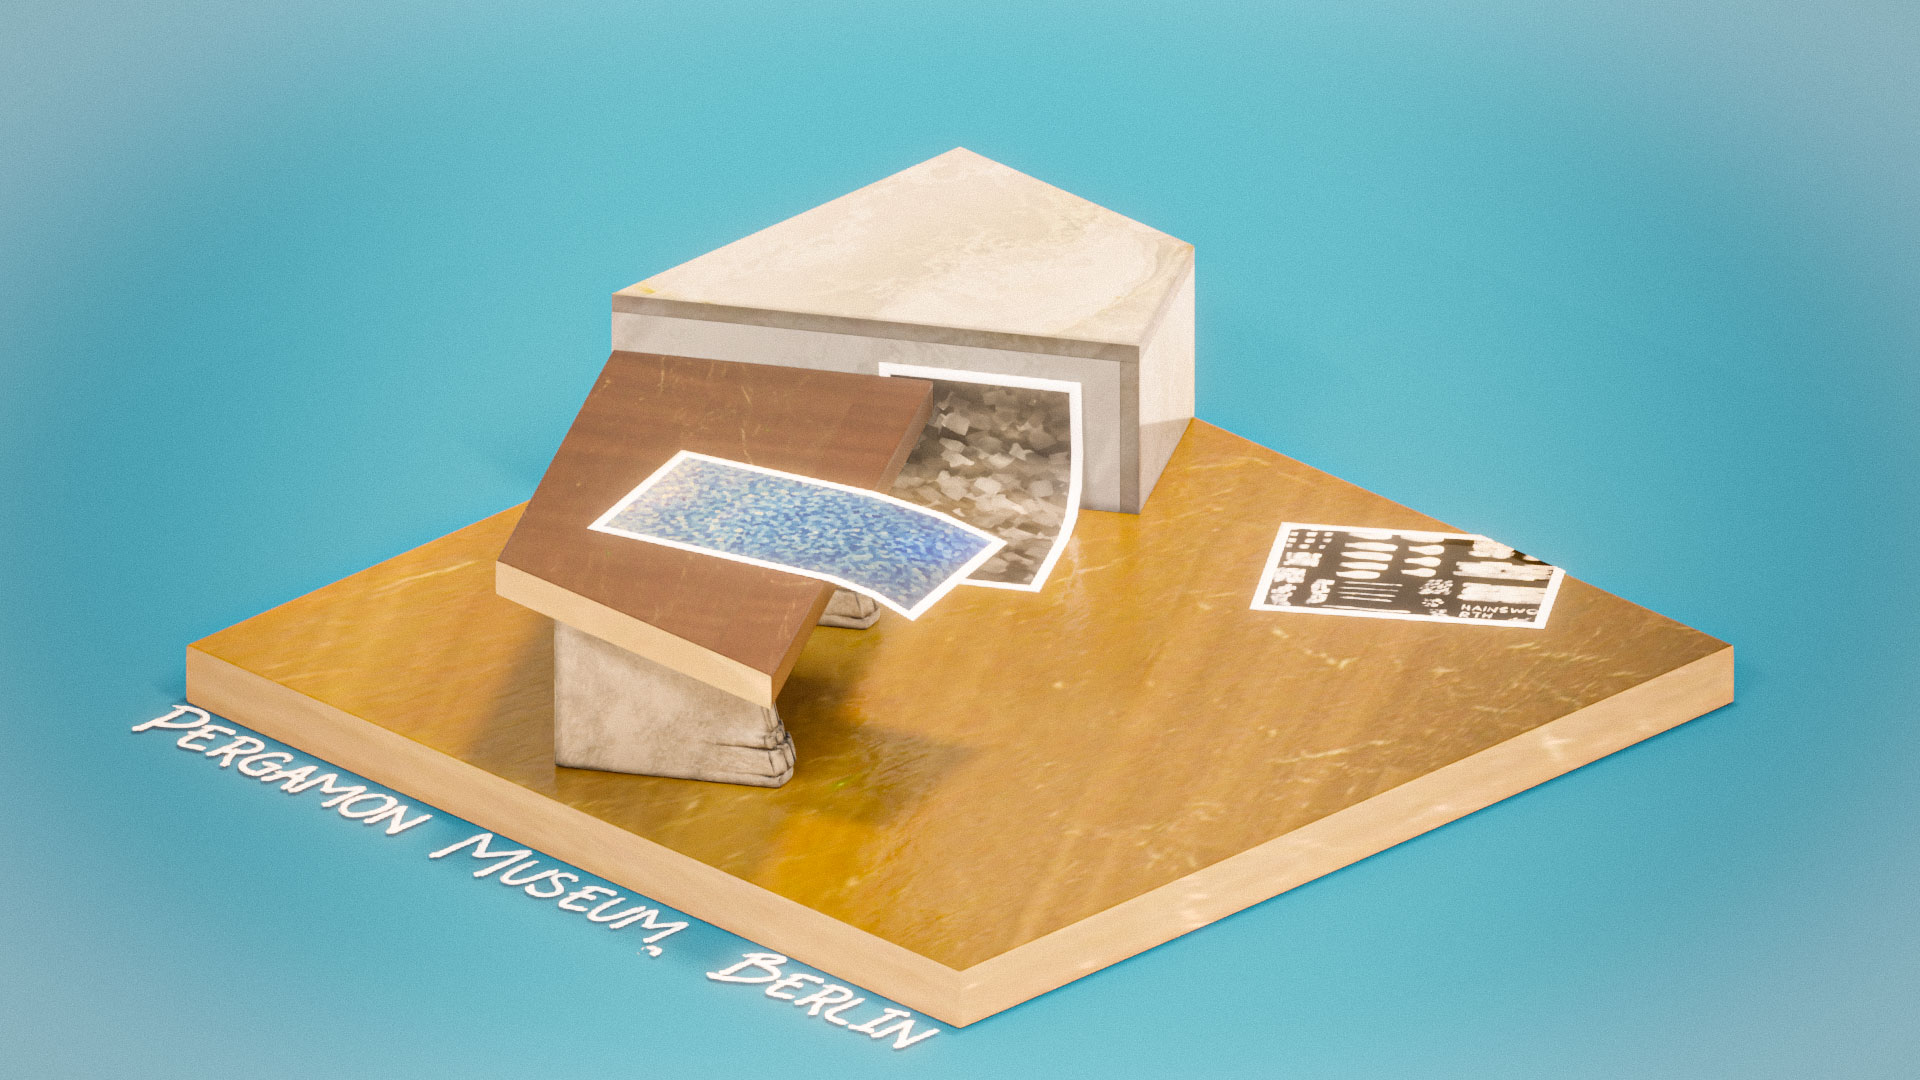 Digital rendering of a wooden board with a small architectural model made from wood and stone. A playing card is hanging from a piece of wood and two other images are visible on the base boards surface. The words Pergamon Museum, Berlin are written in front of the model.